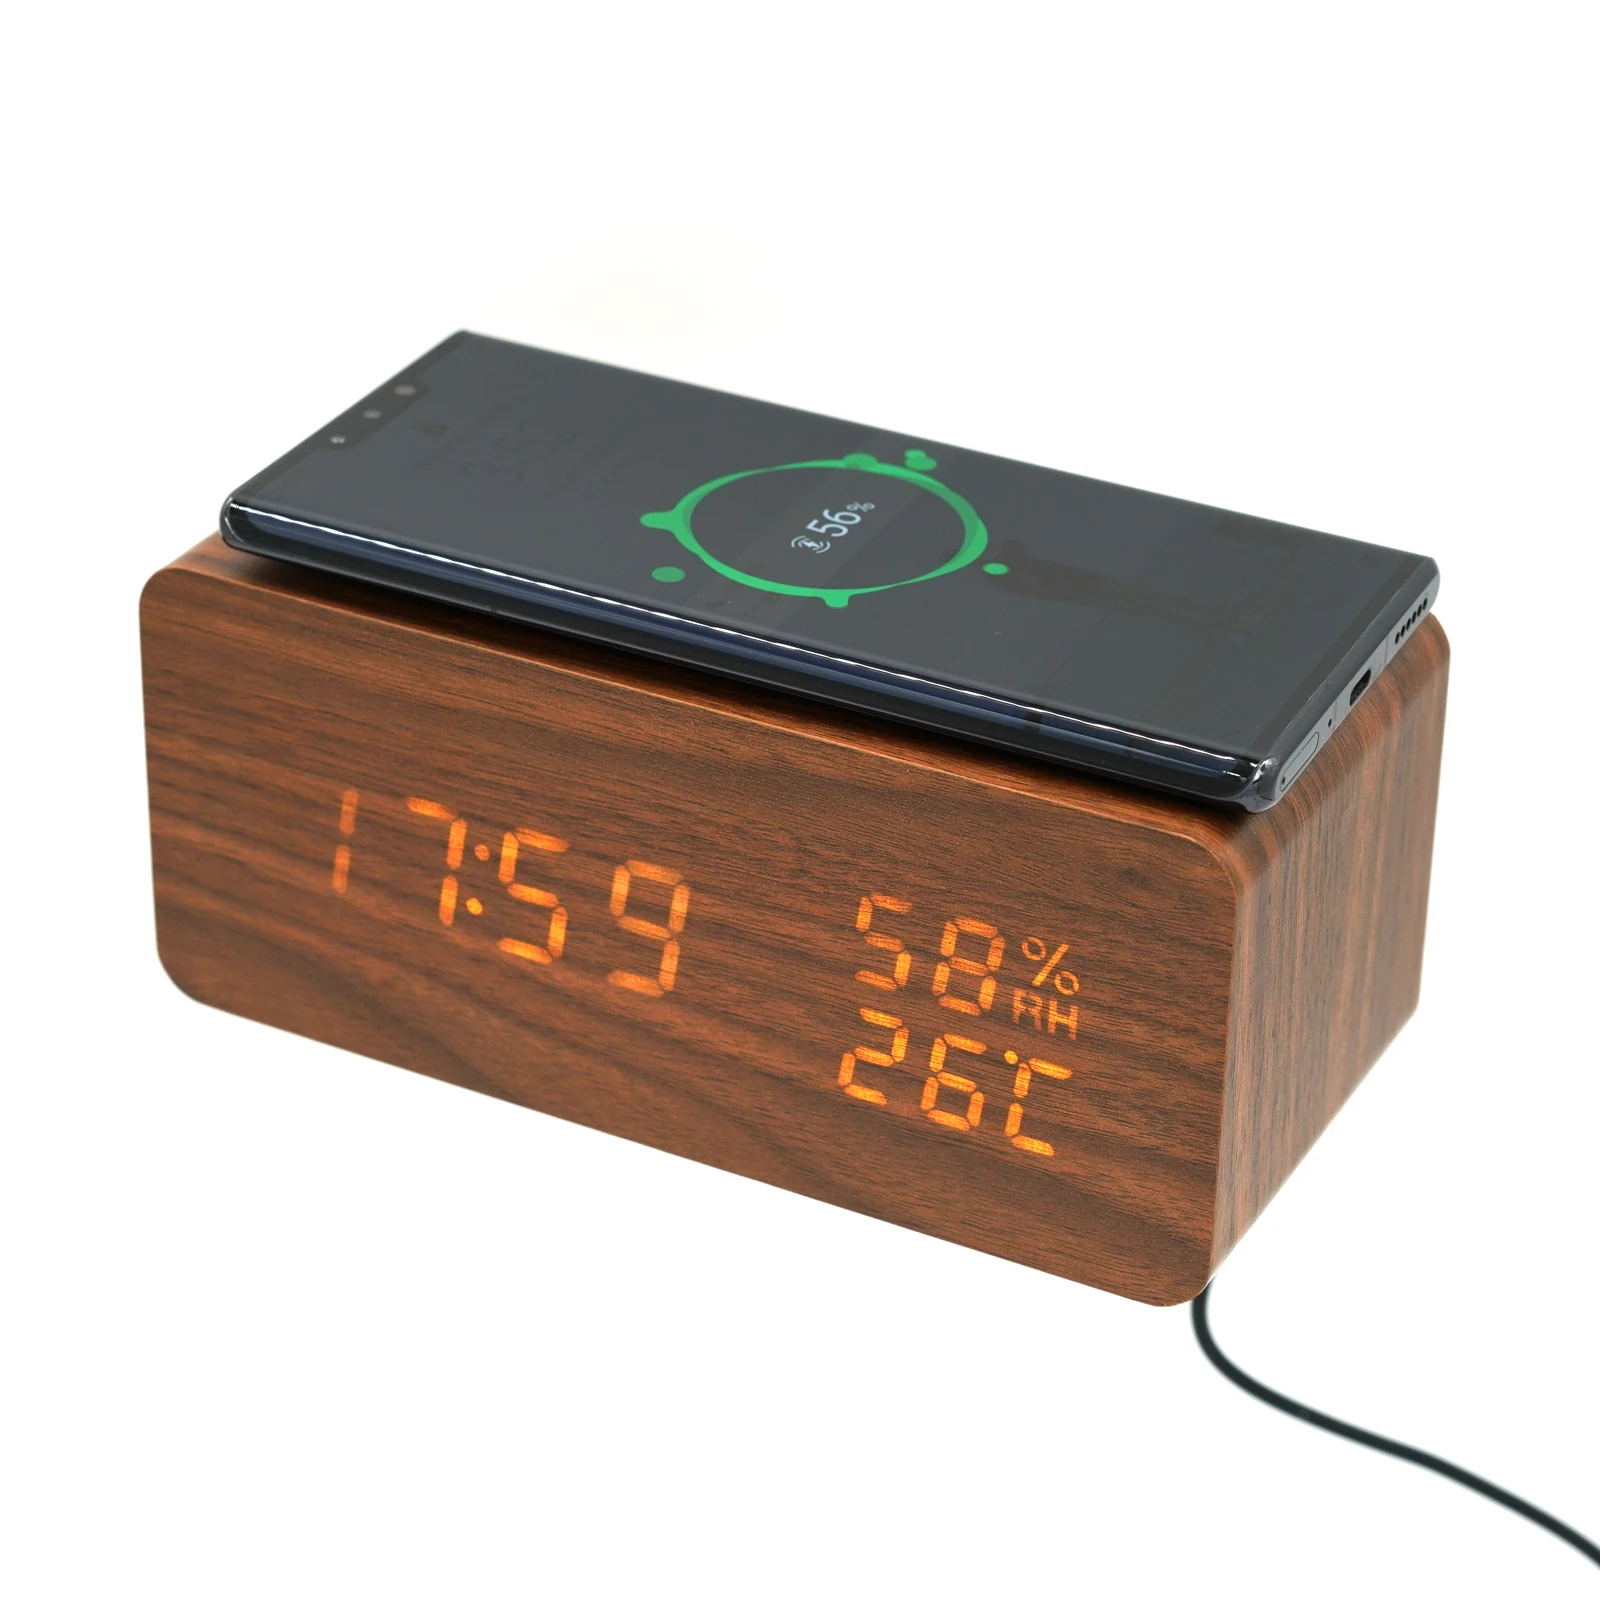 

China Wooden Alarm Clock with Snooze Wireless Charger QI LED Temperature Calendars Date Analog Digital Desk Table Clock